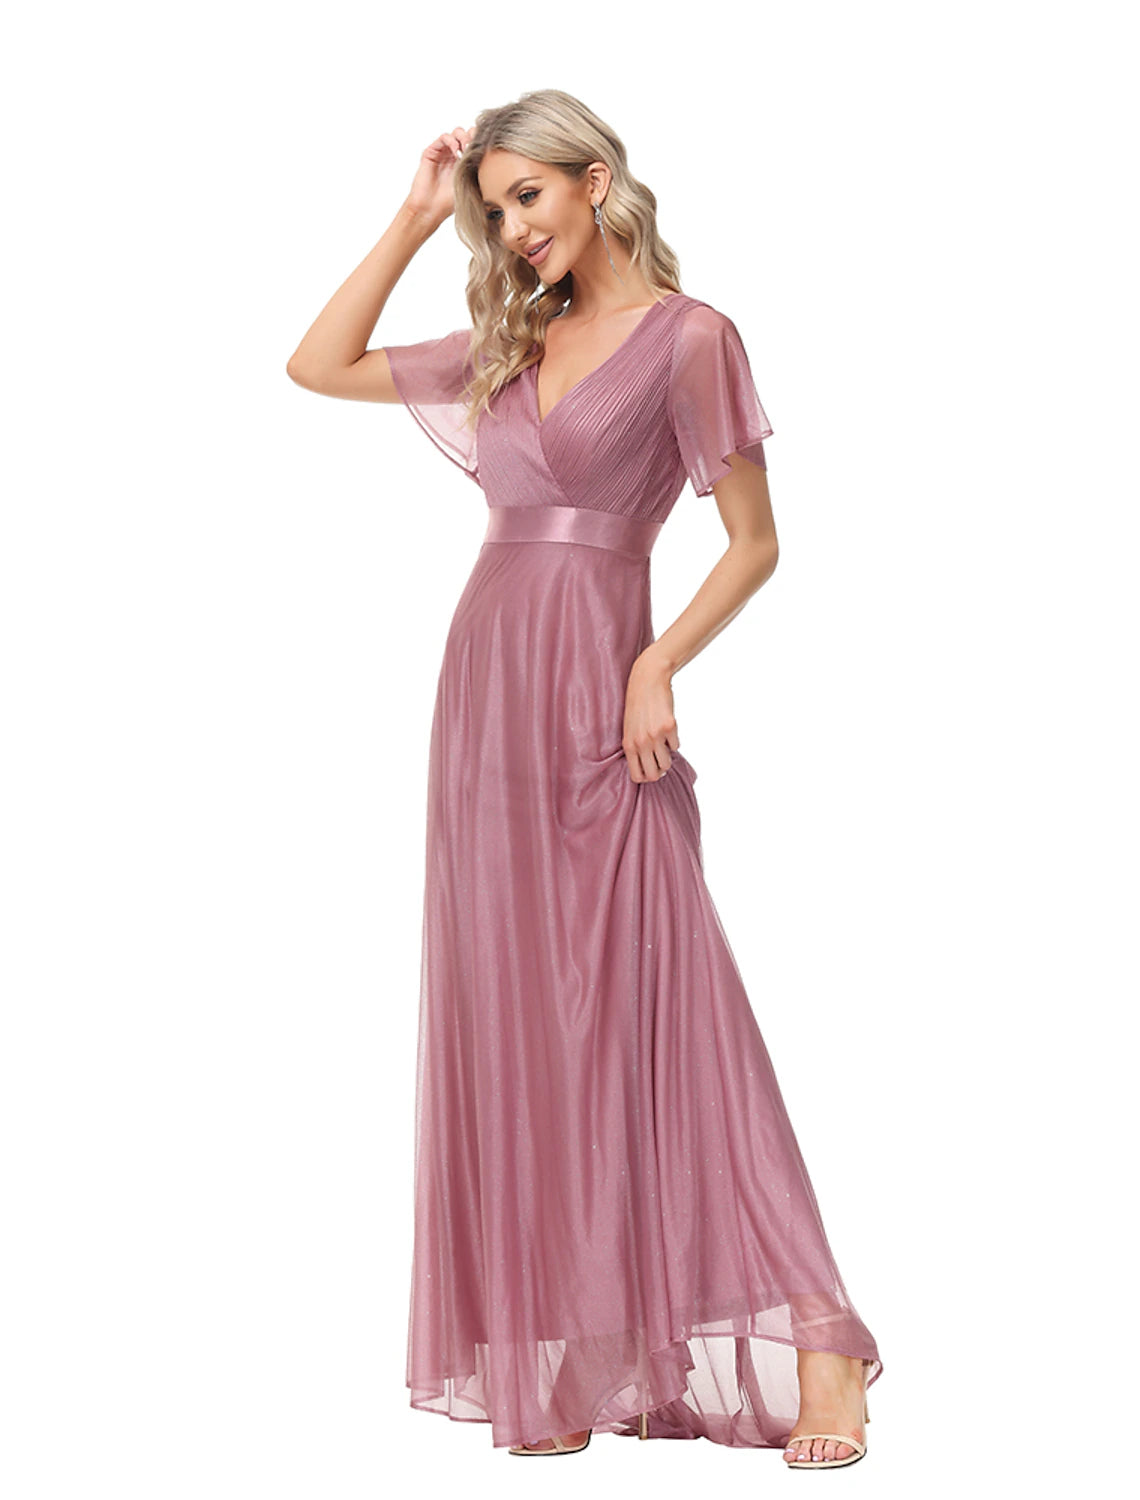 A-Line Evening Gown Empire Dress Wedding Guest Floor Length Short Sleeve V Neck Tulle with Ruched Ruffles